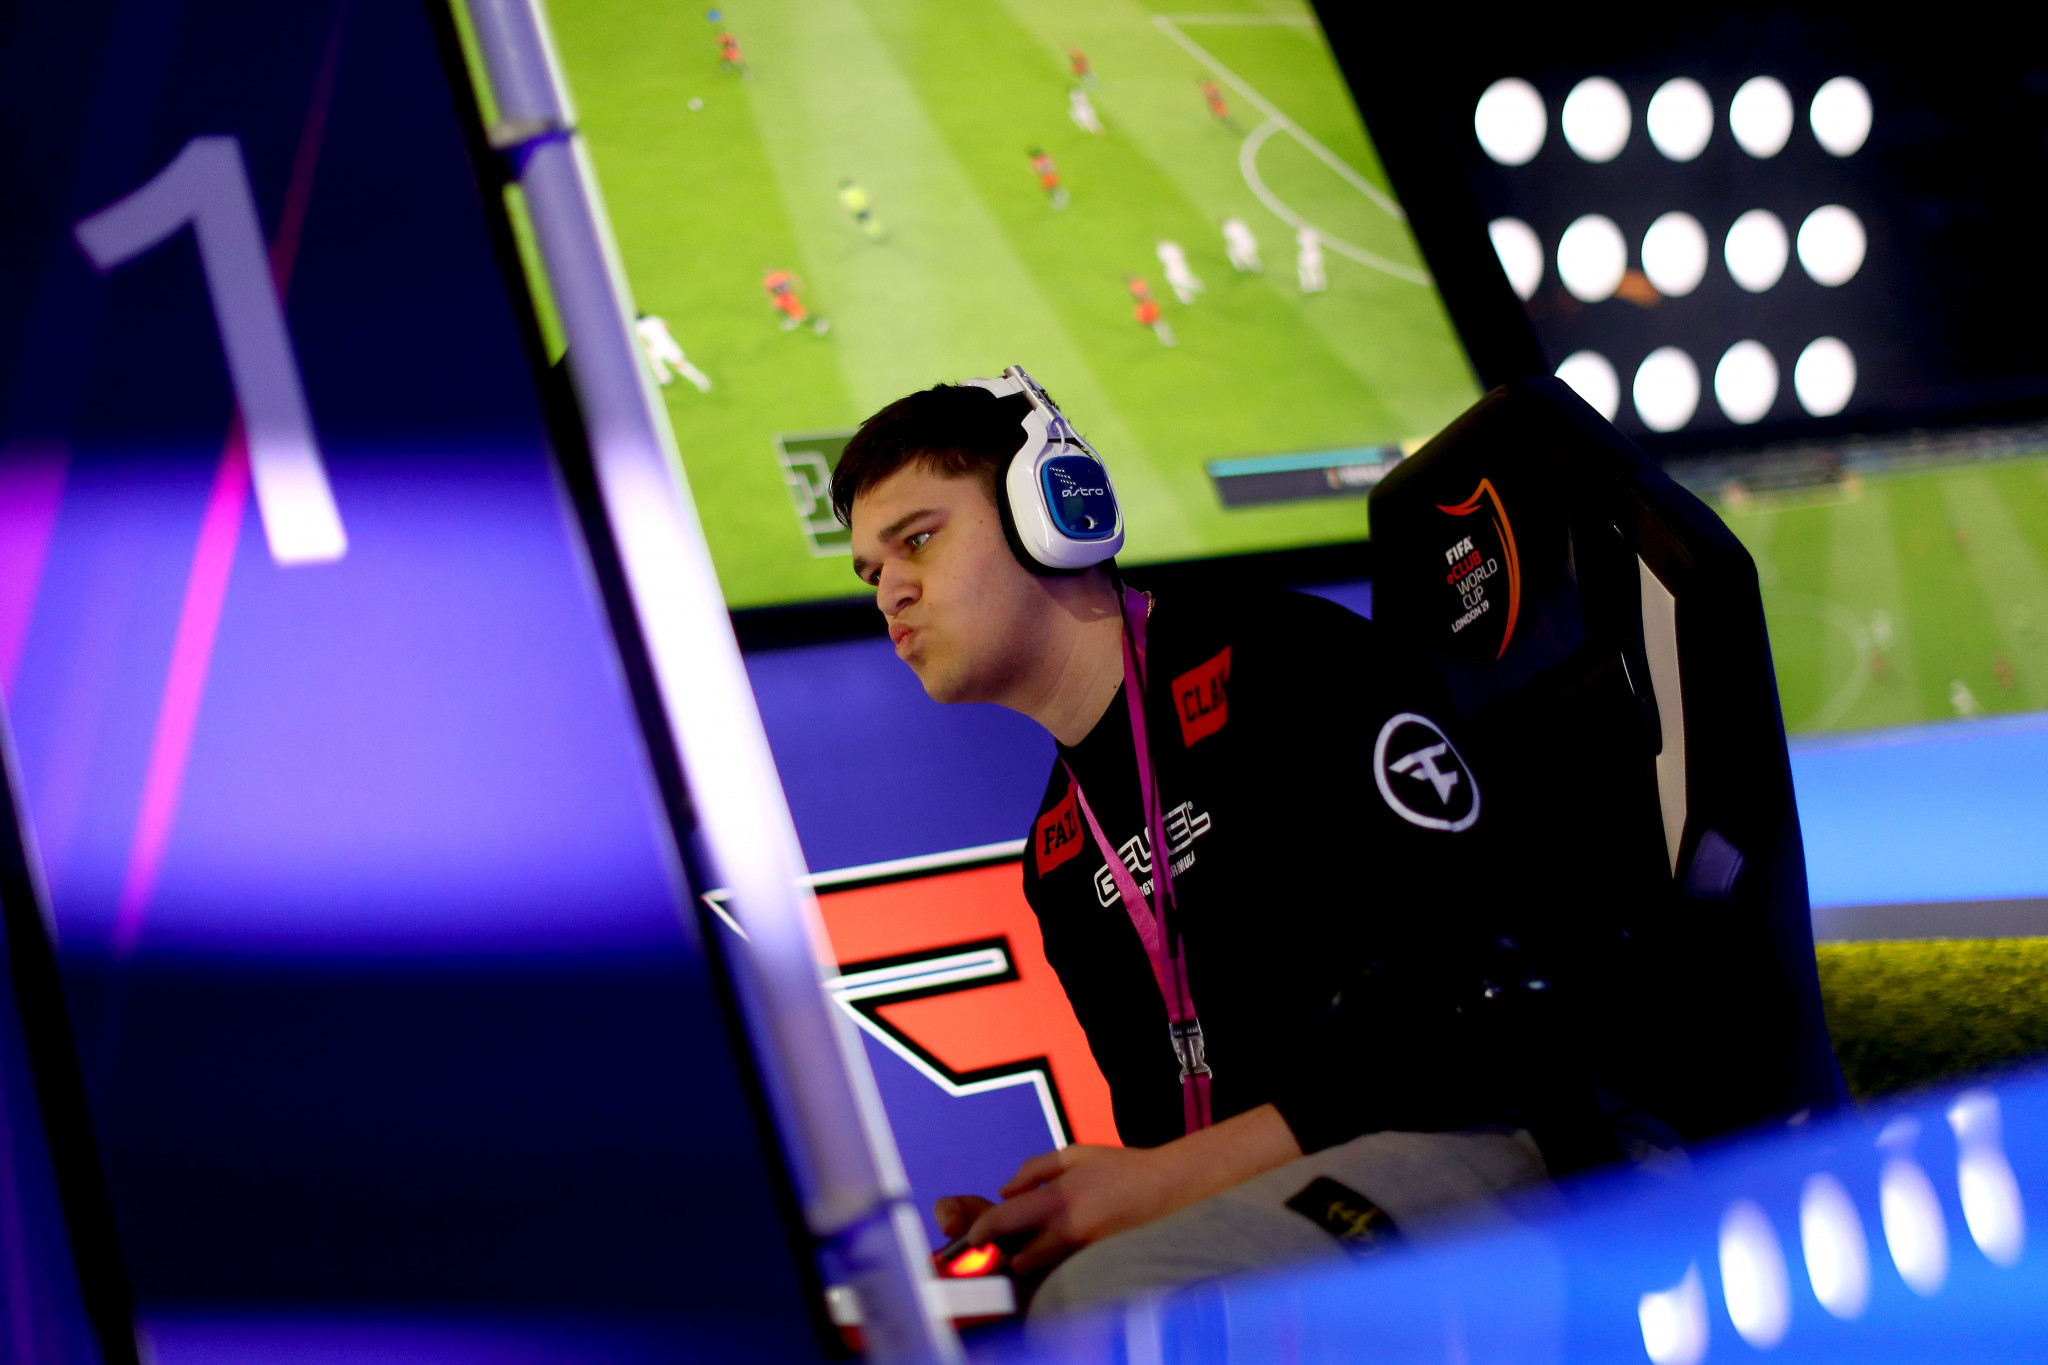 Esports has grown into an even more lucrative business during COVID-19 lockdowns ©Getty Images